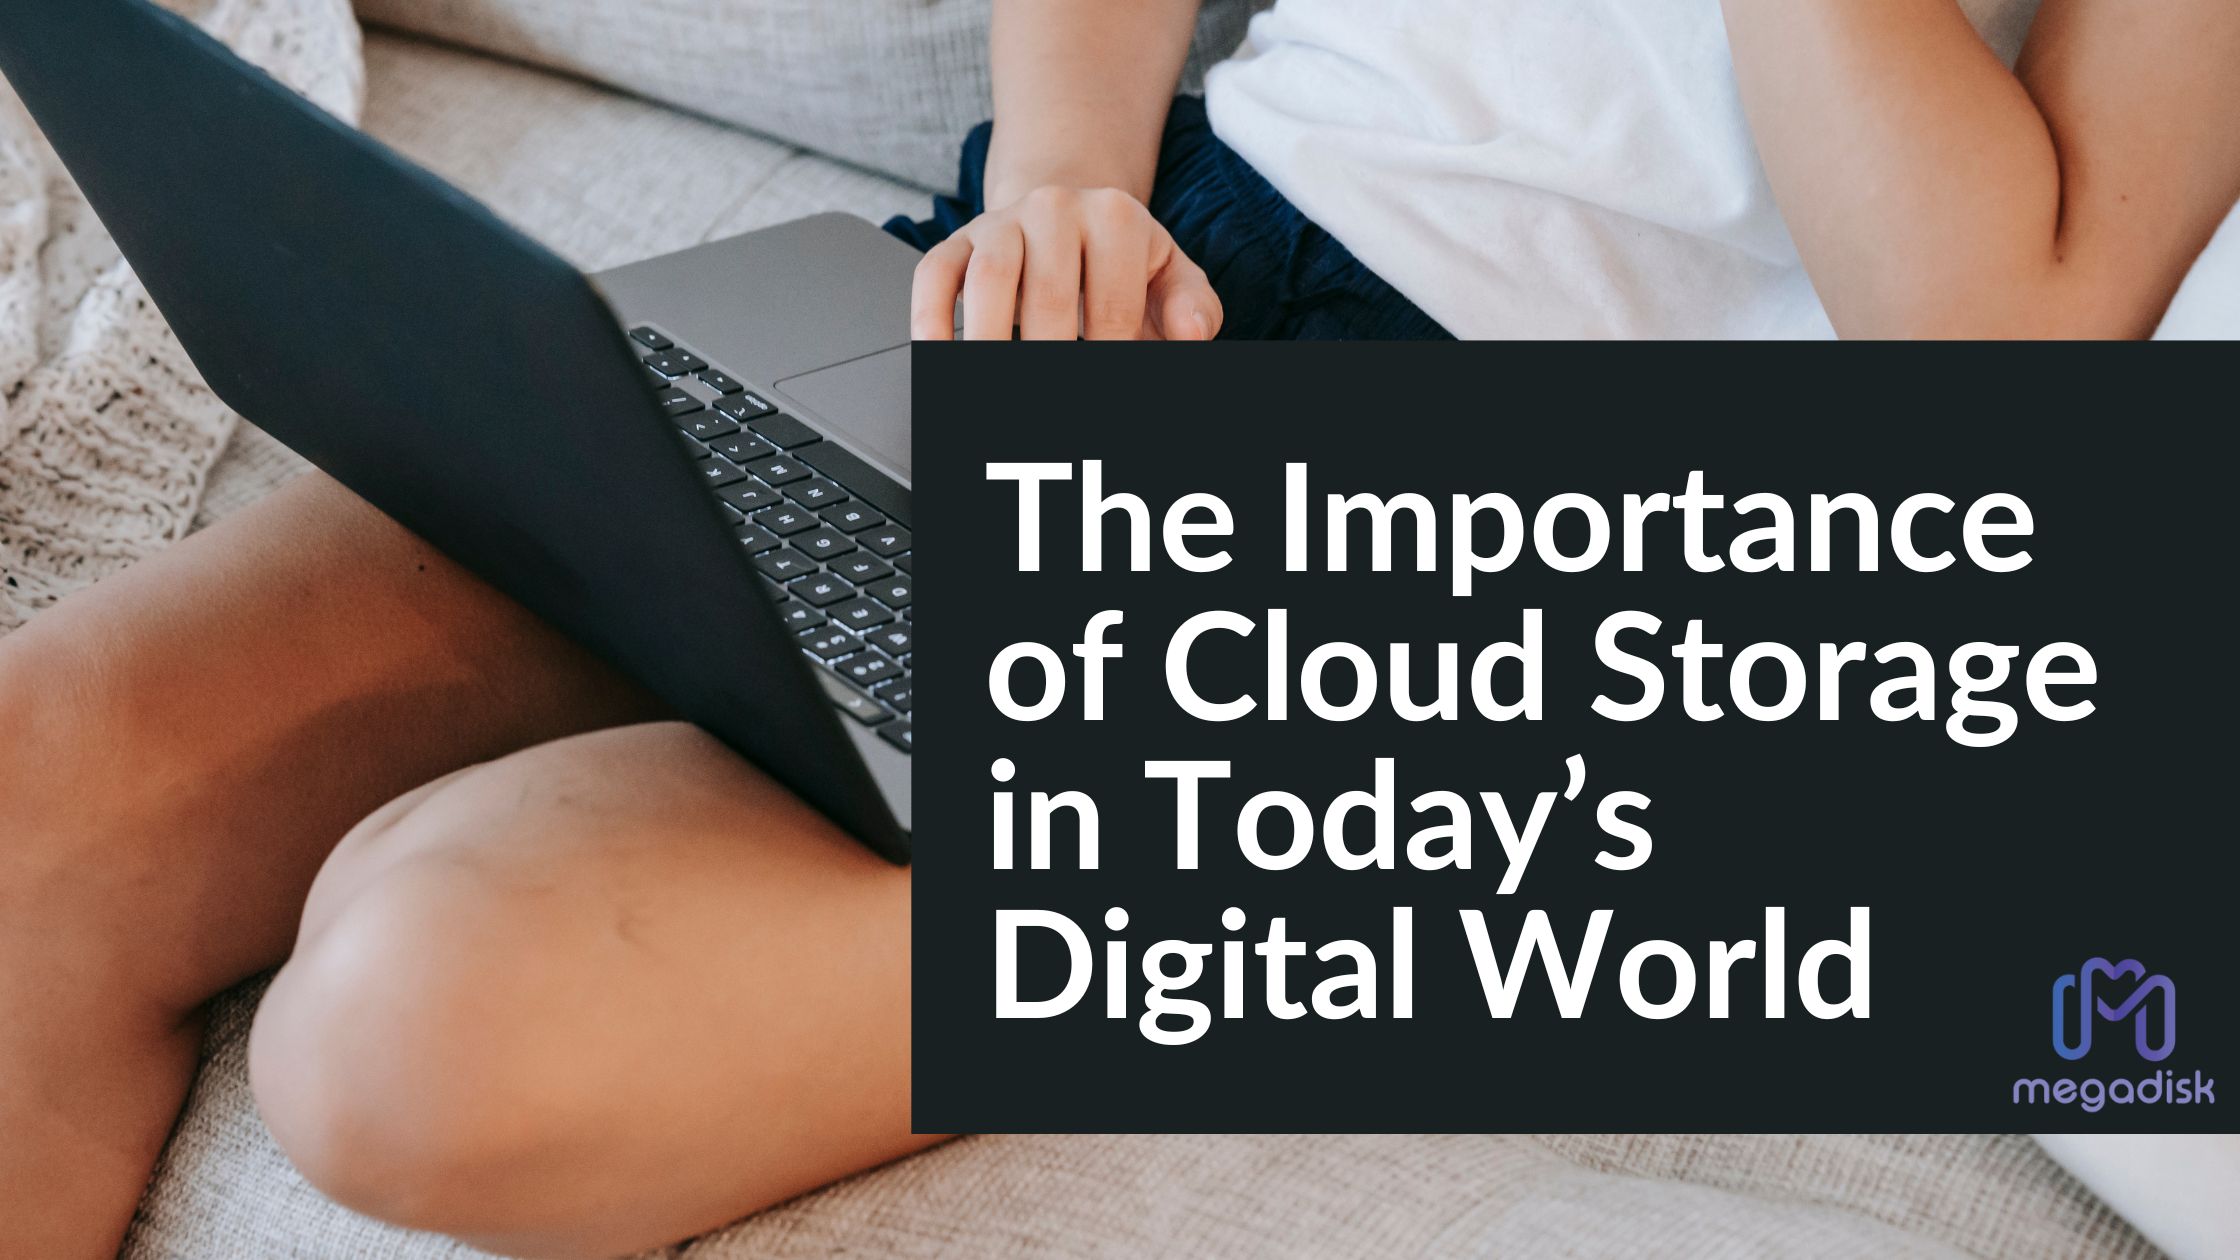 The Importance of Cloud Storage in Today’s Digital World